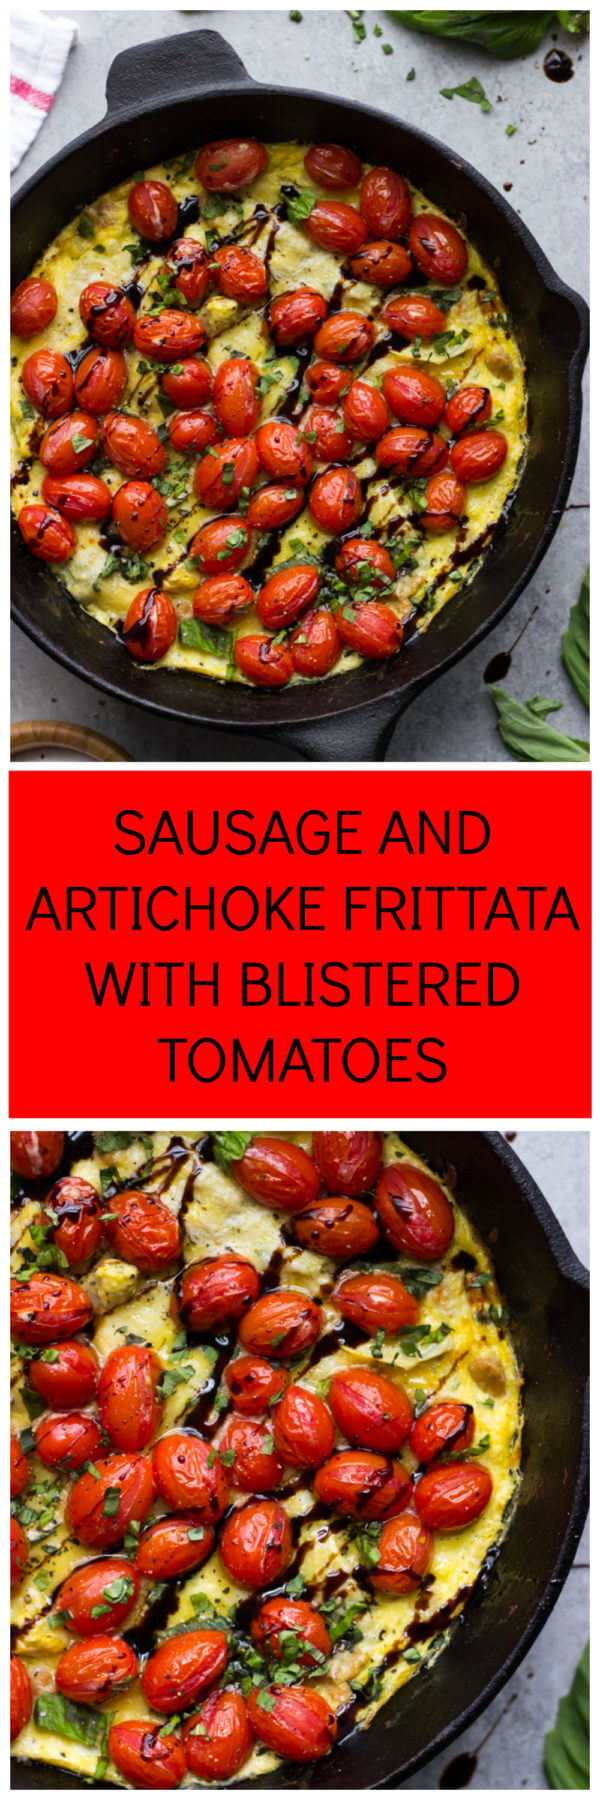 Sausage and Artichoke Frittata with Blistered Tomatoes - Little Broken